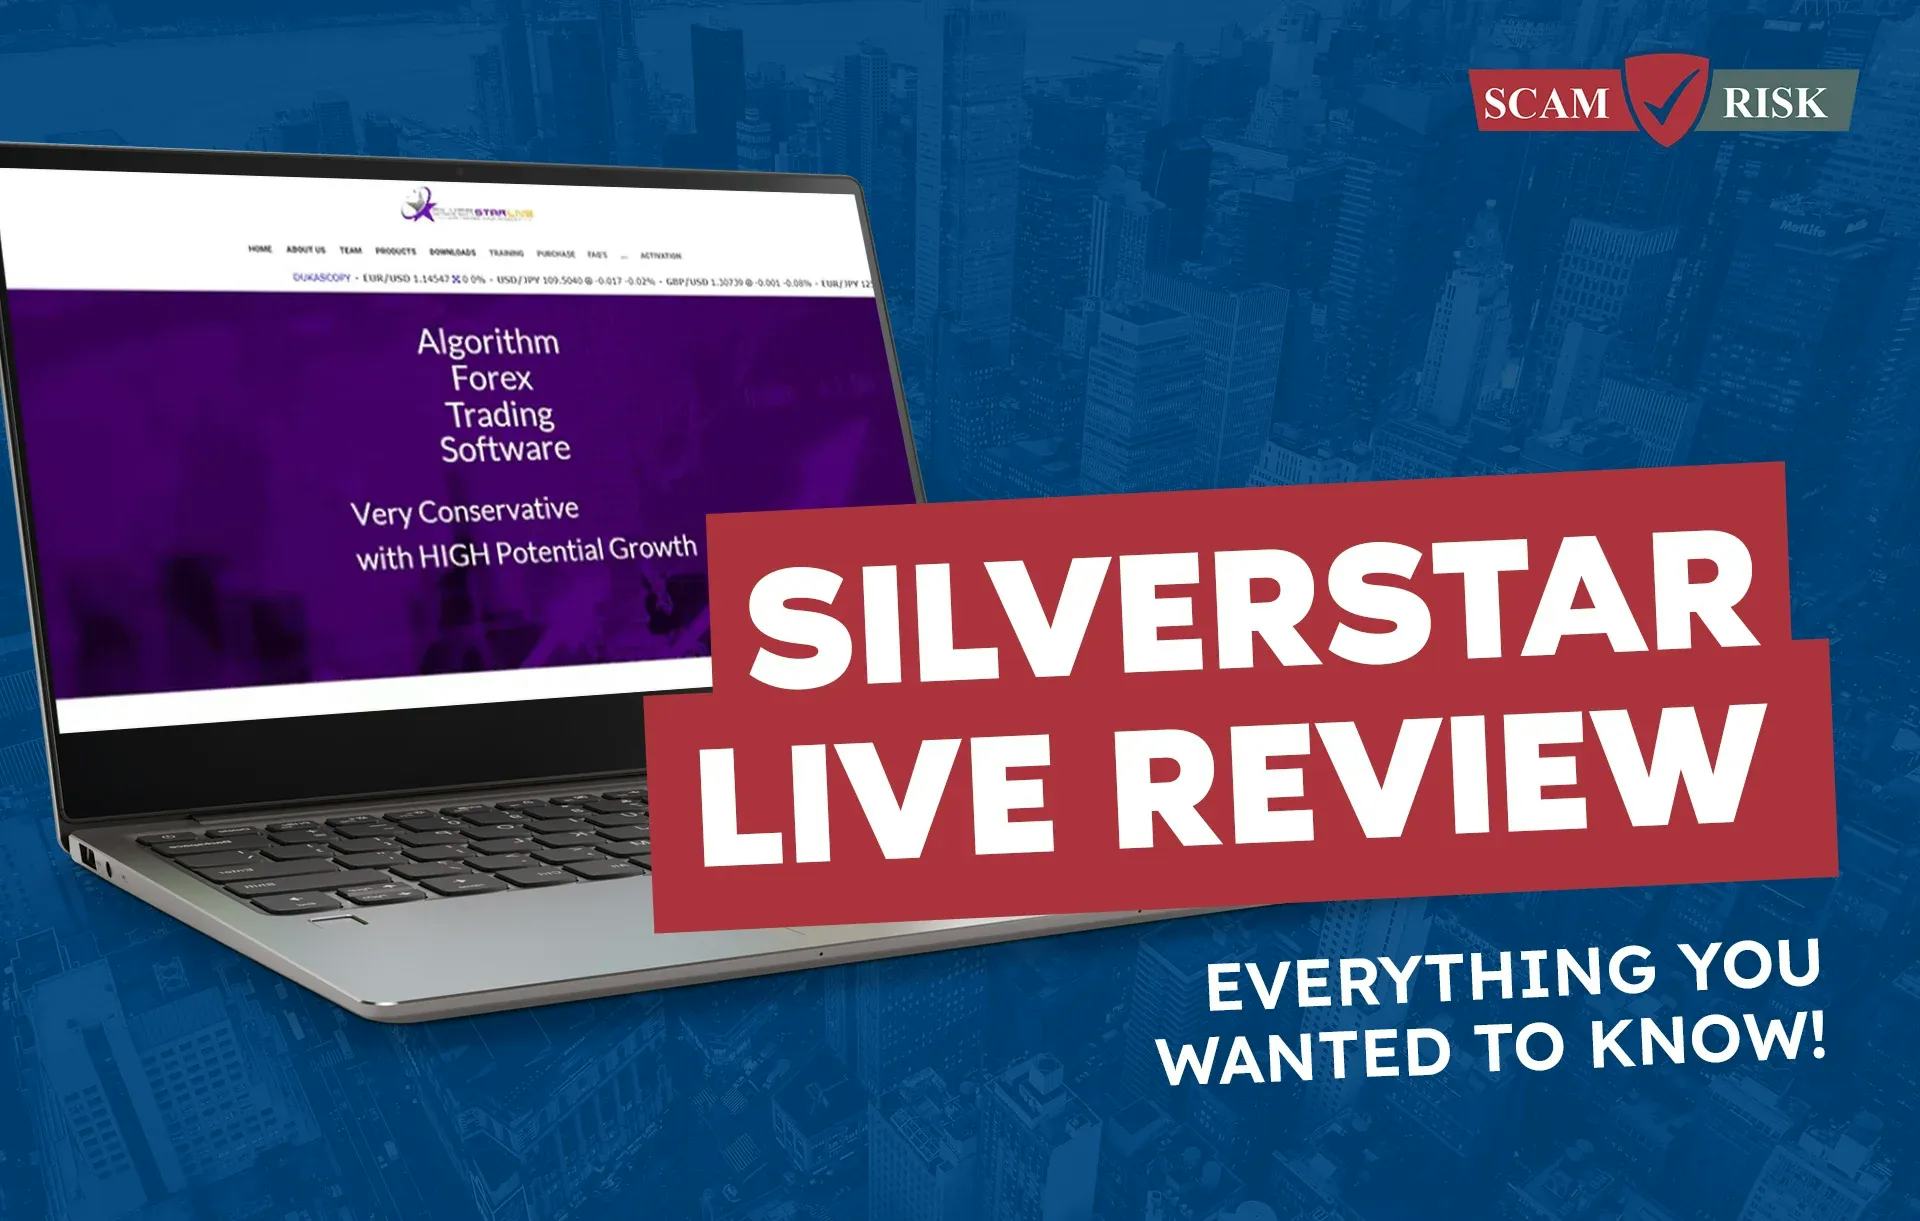 Silverstar Live Review ([year] Update): Everything You Wanted To Know!